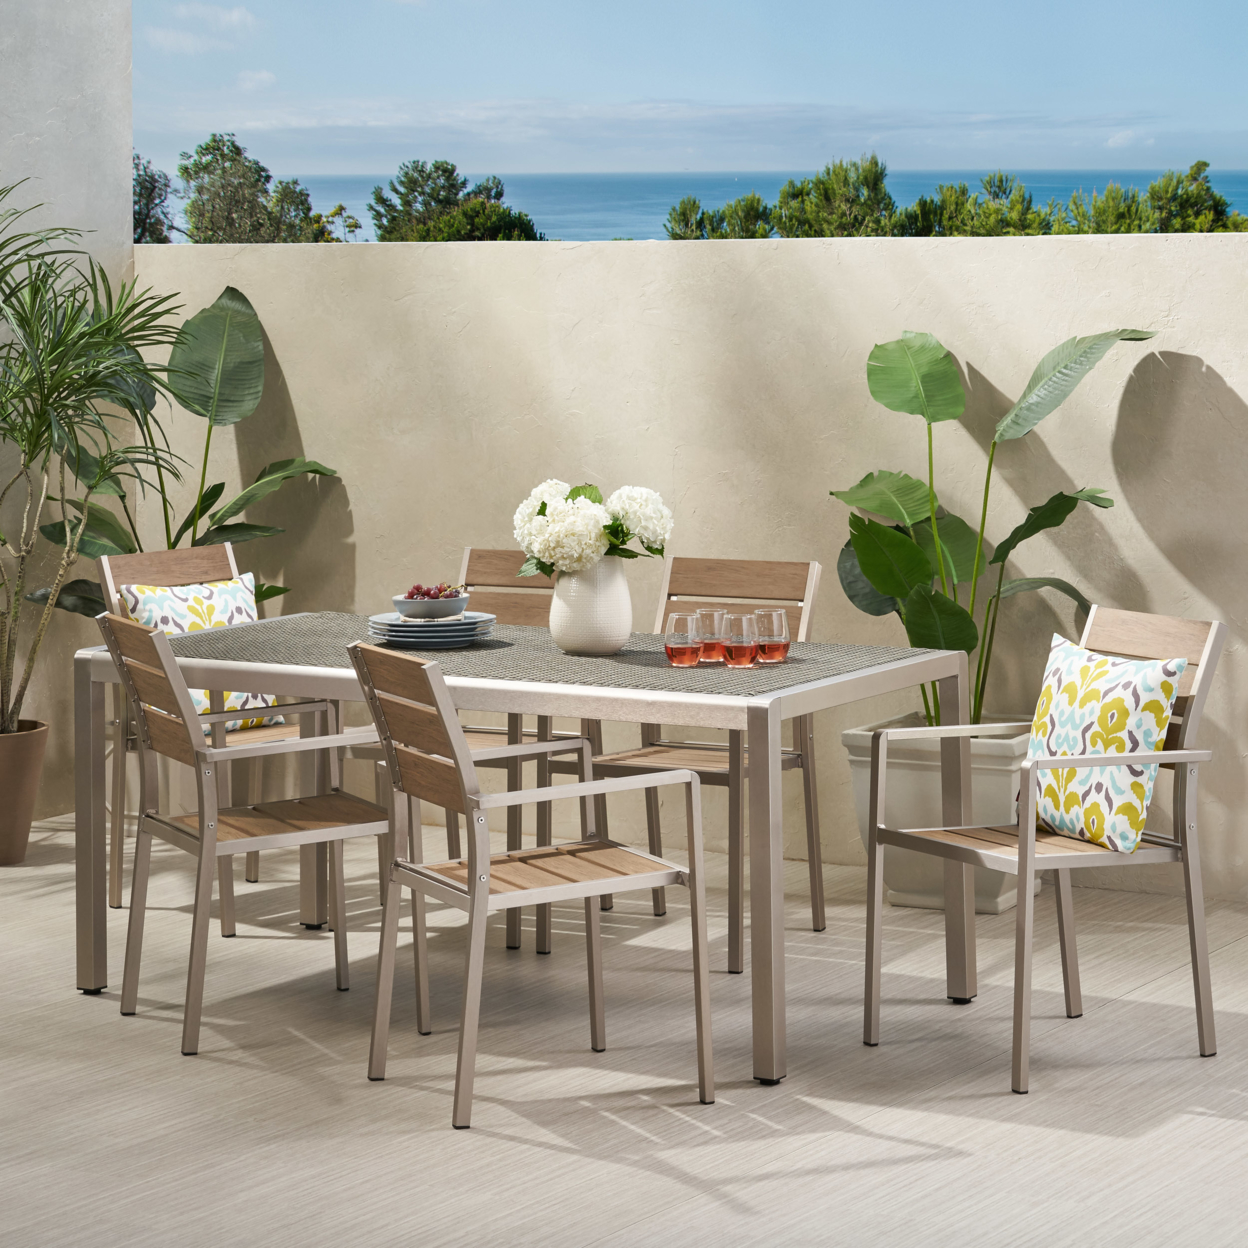 Eleanore Outdoor Modern Aluminum 6 Seater Dining Set With Faux Wood Seats - Gray + Natural Finish + Silver